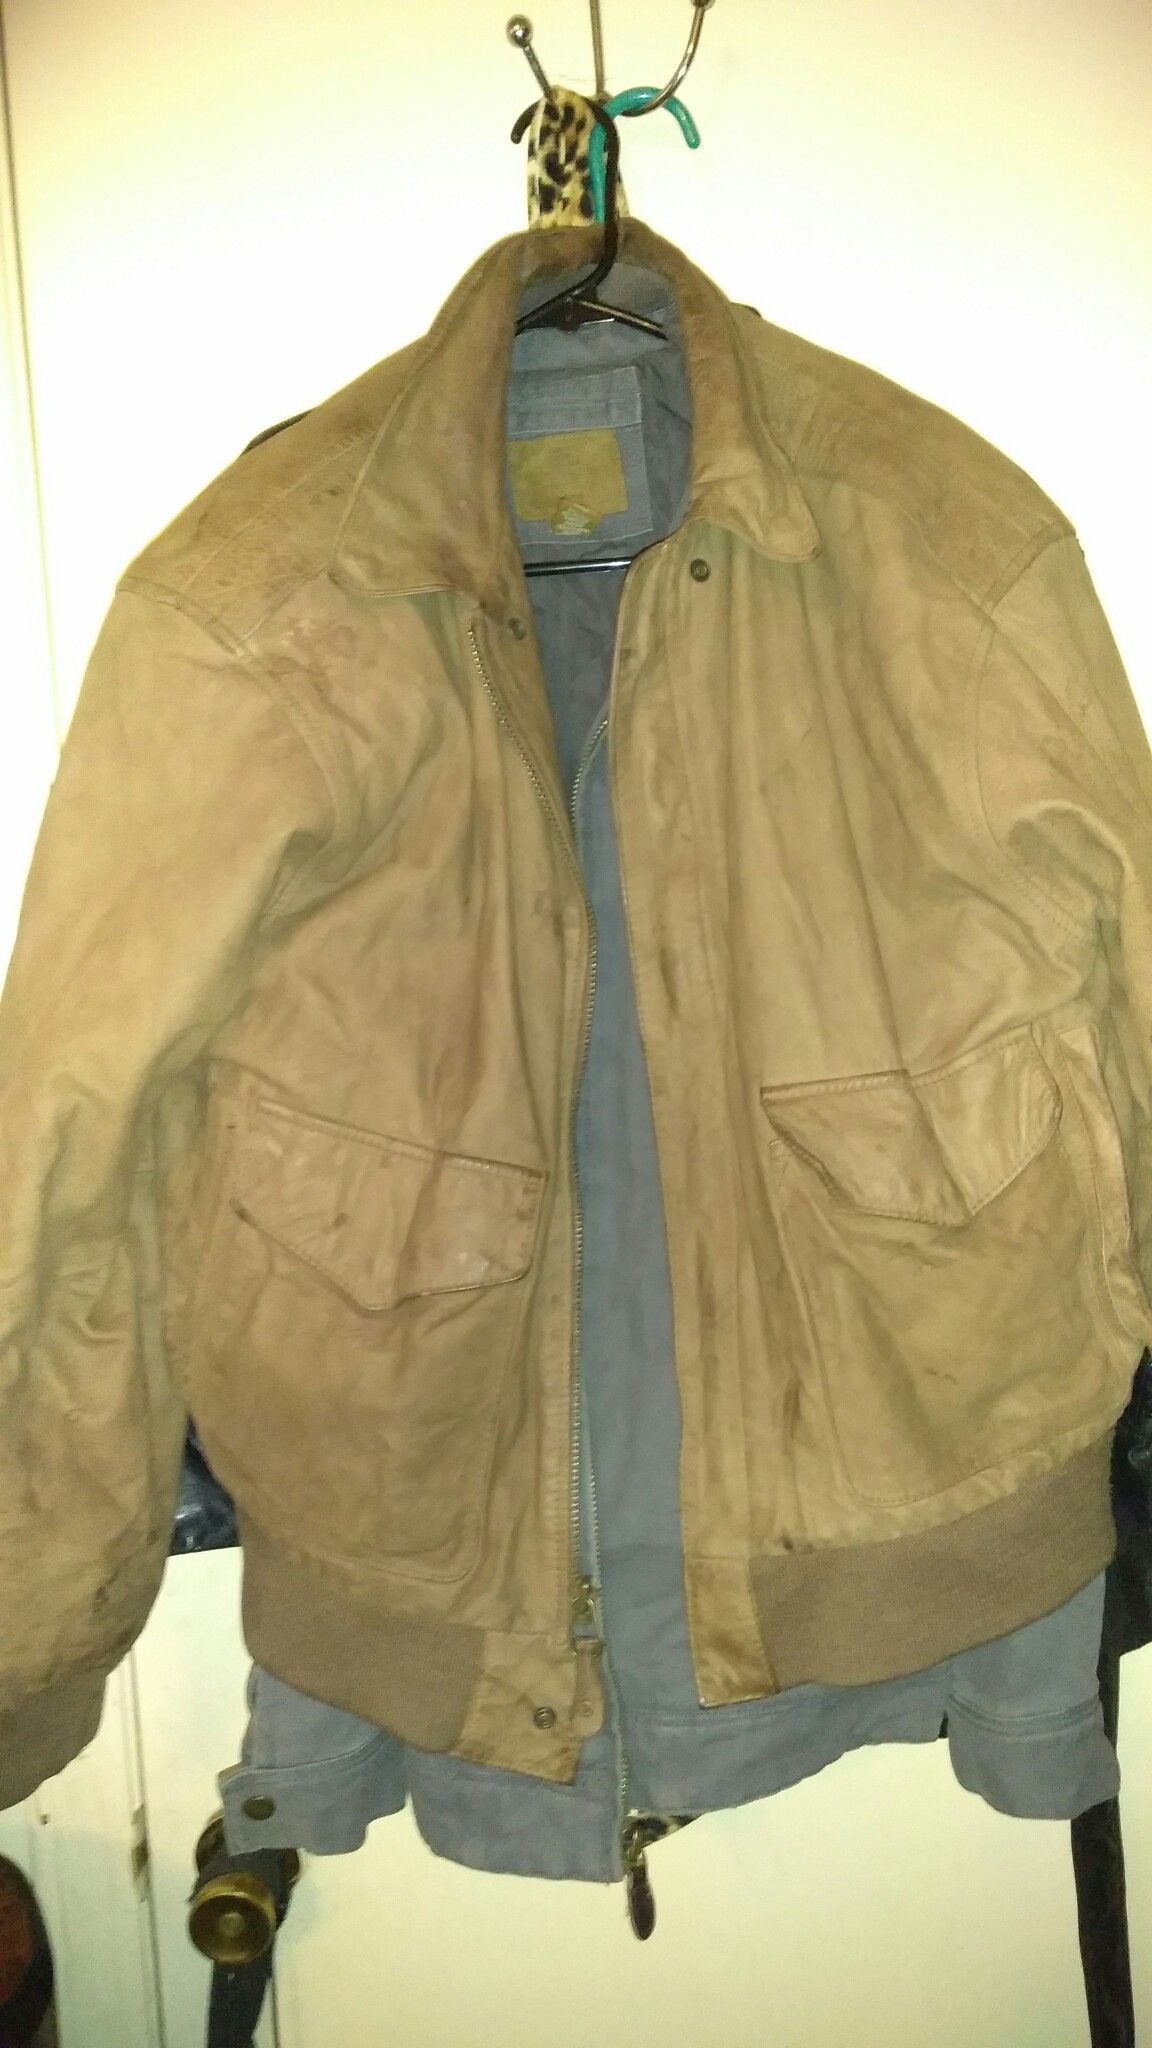 G lll, BROWN LEATHER BOMBER JACKET SIZE LARGE